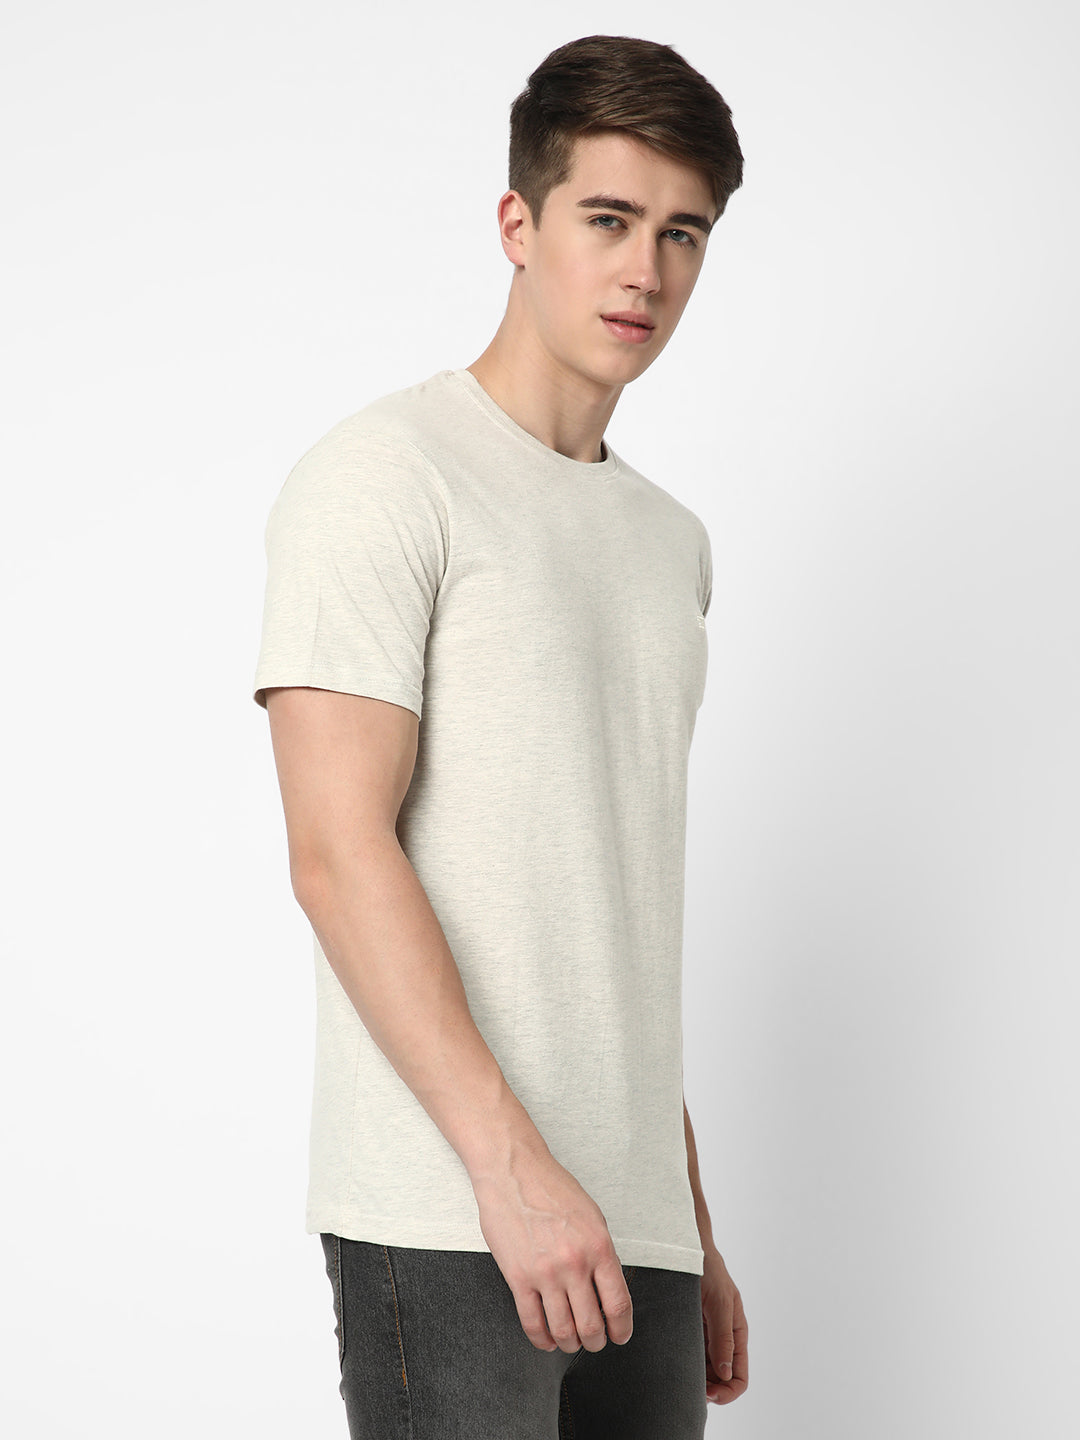 Cotstyle Cotton Fabrics Round Neck Short Length Plain Half Sleeve Casual & Daily Wear Men's T-Shirts -  Pack of 1 - Oatmeal Melange